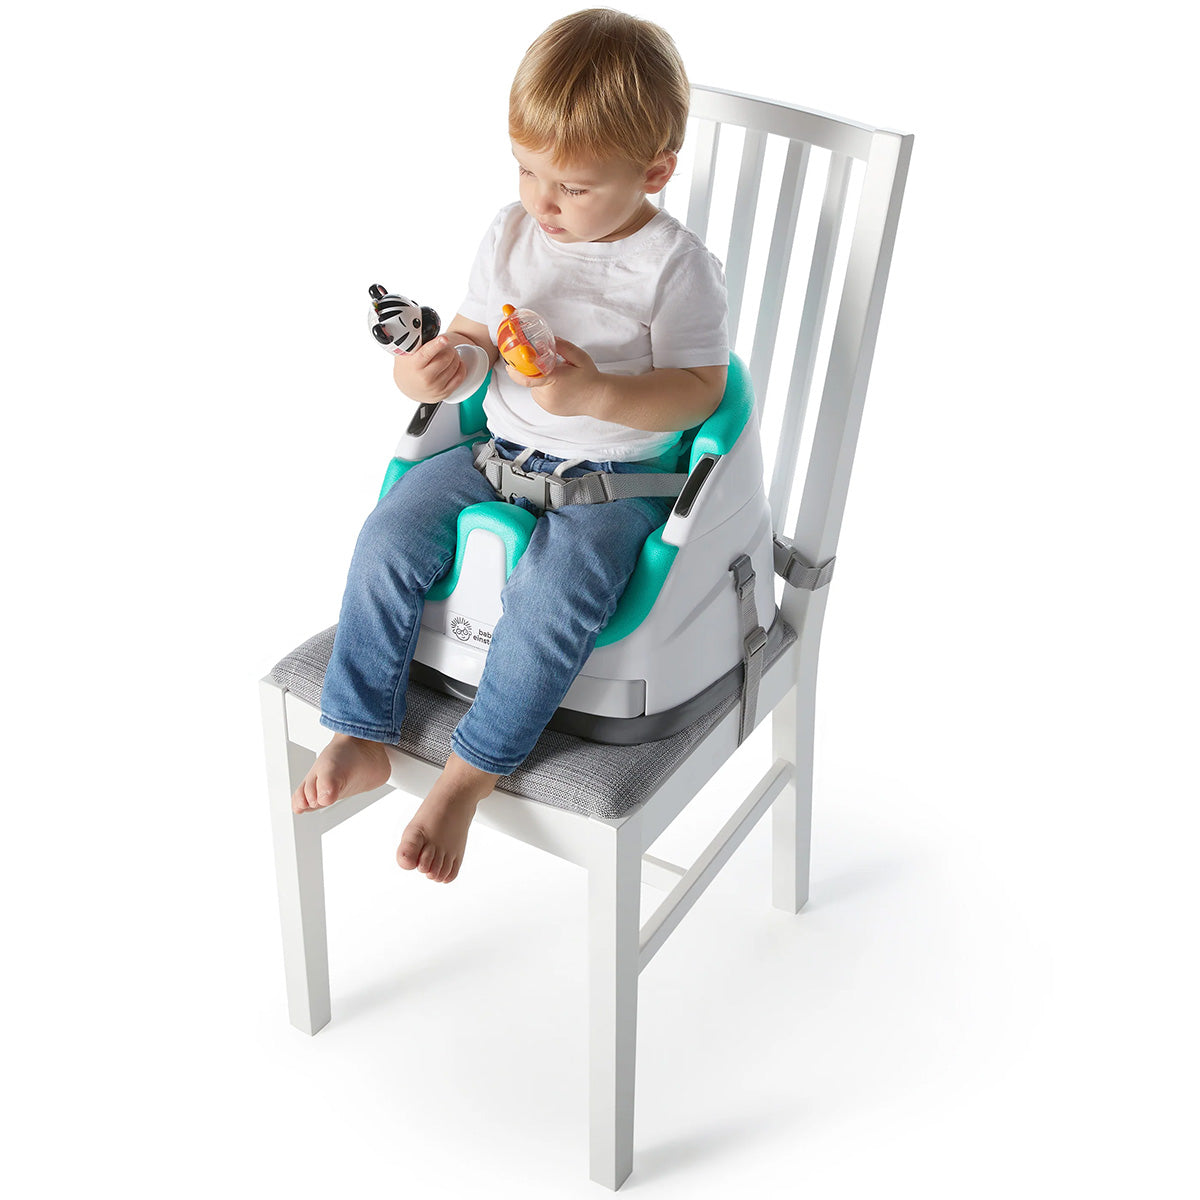 Baby Einstein - Dine & Discover Multi-Use Booster Seat